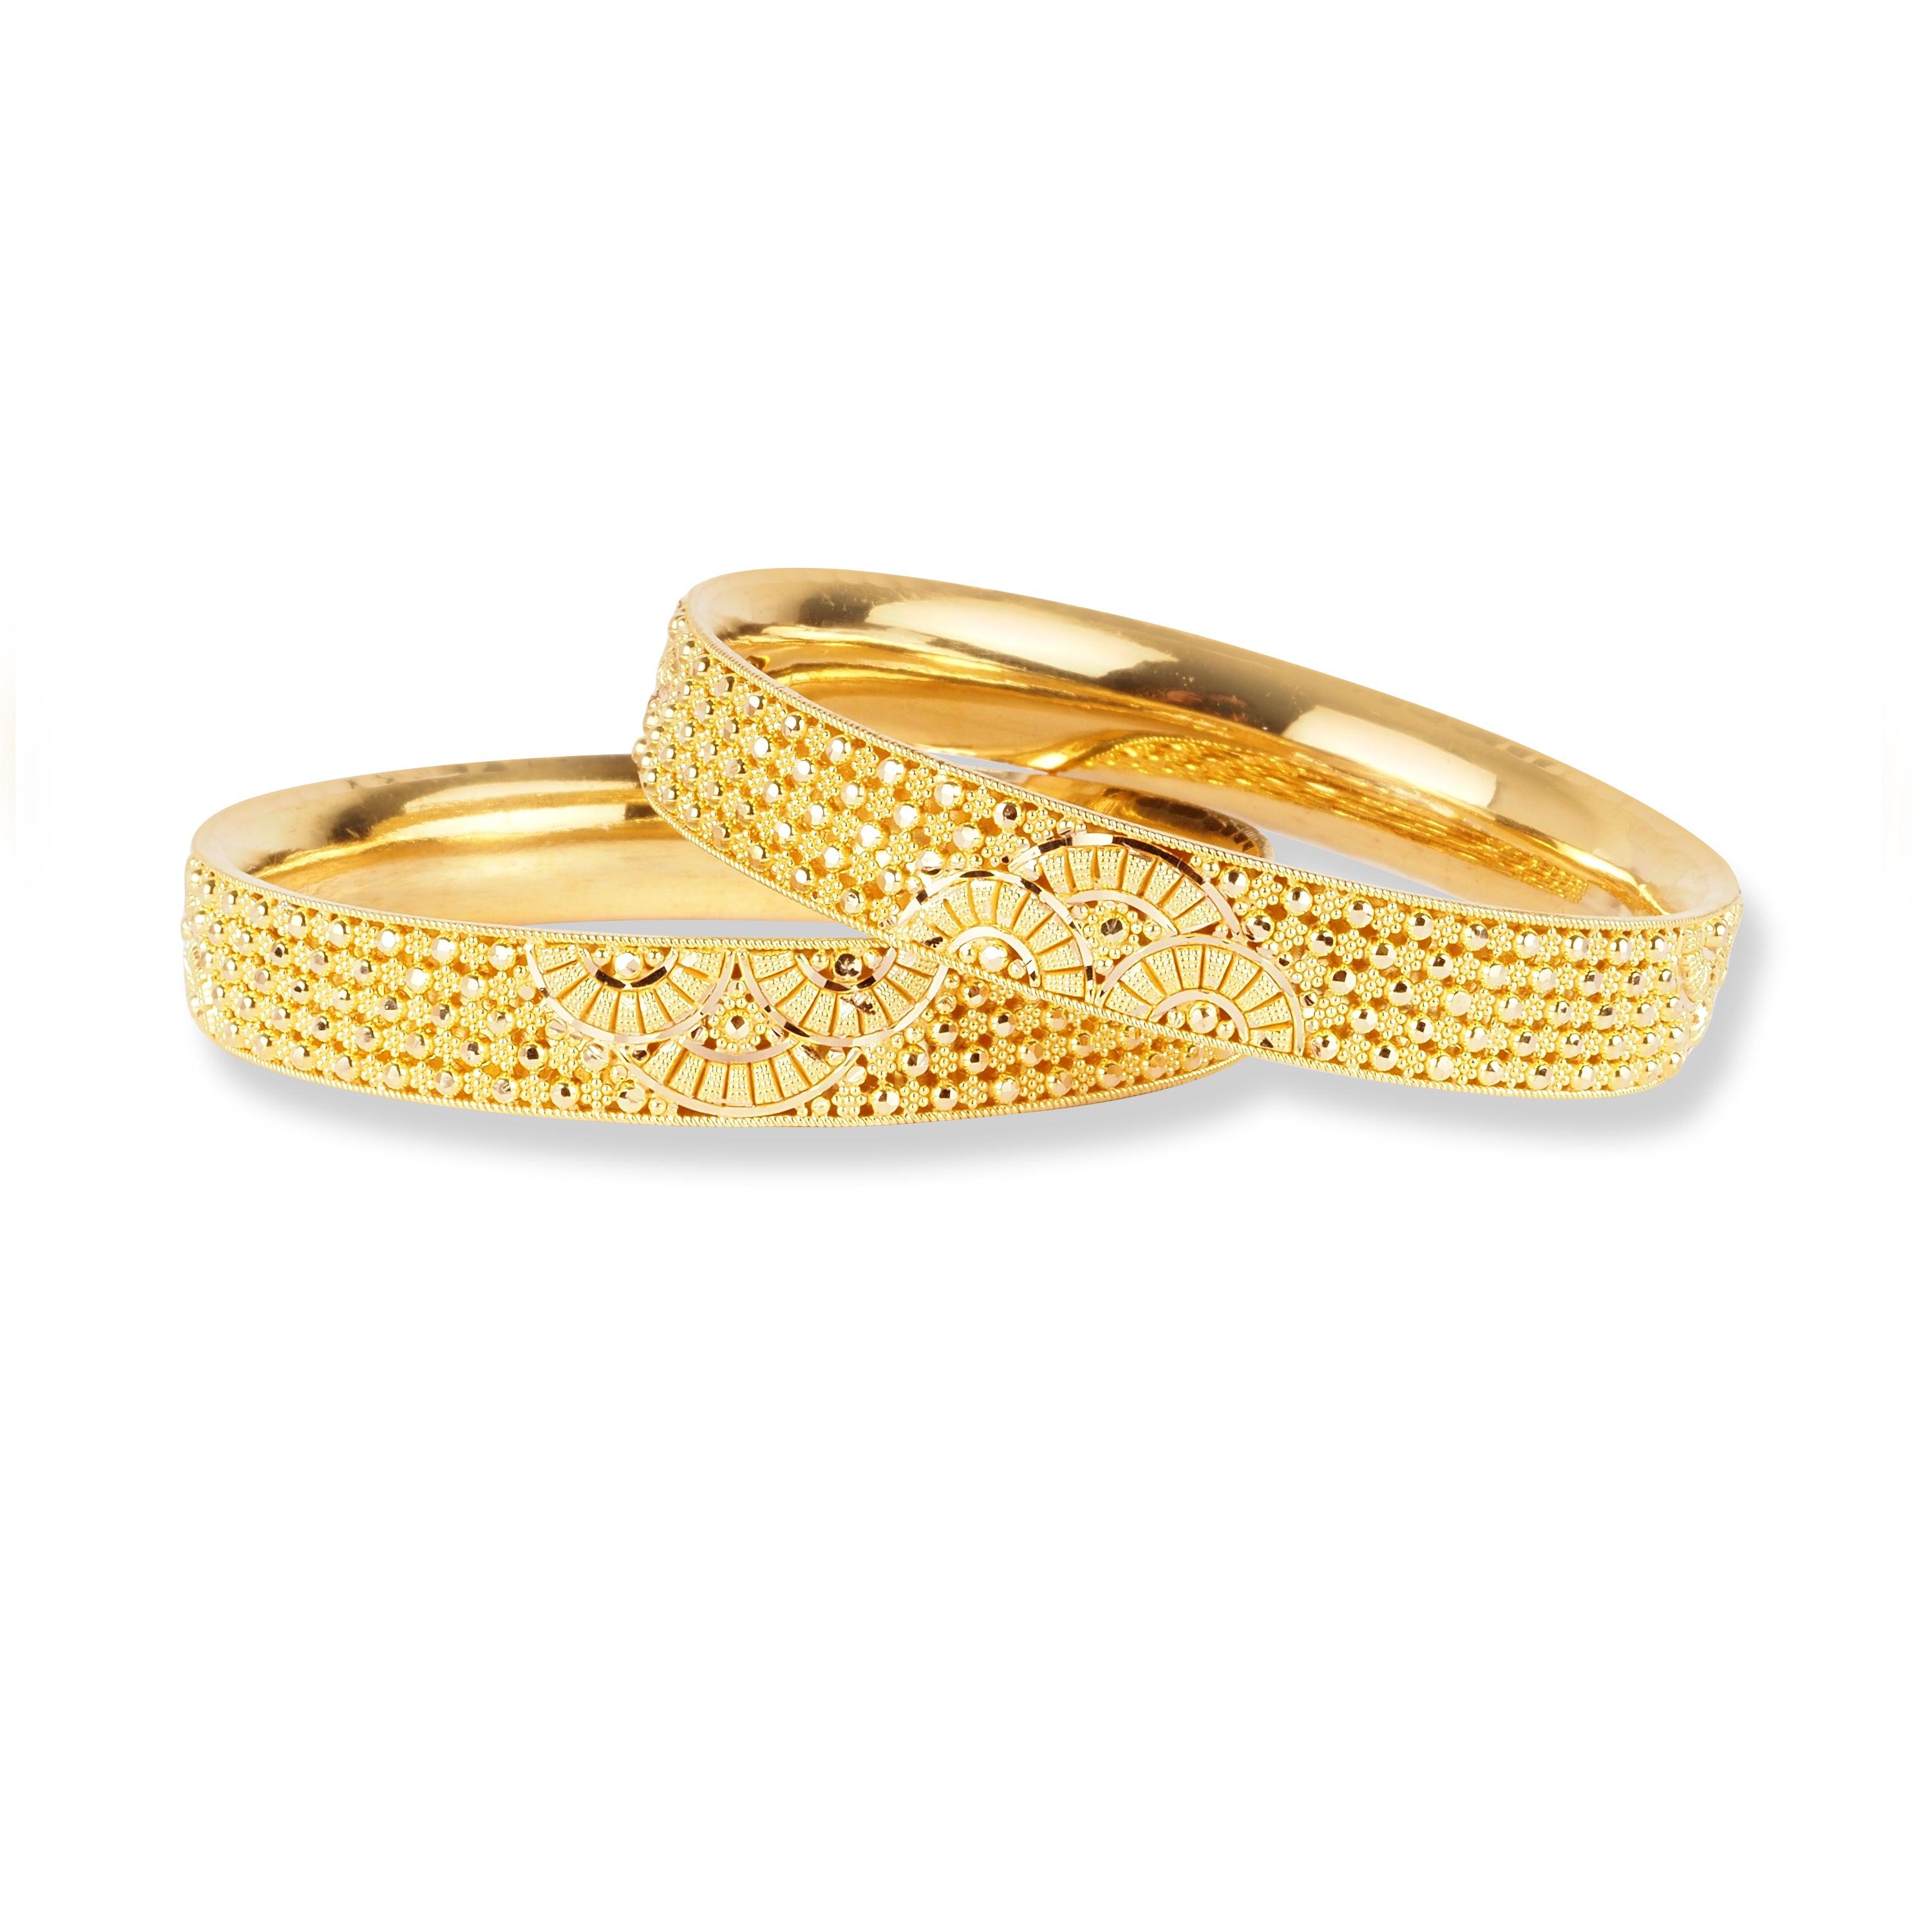 22ct Indian Gold Set of Two Bangles with Filigree Work in Comfort Fit Finish B-8548 - Minar Jewellers